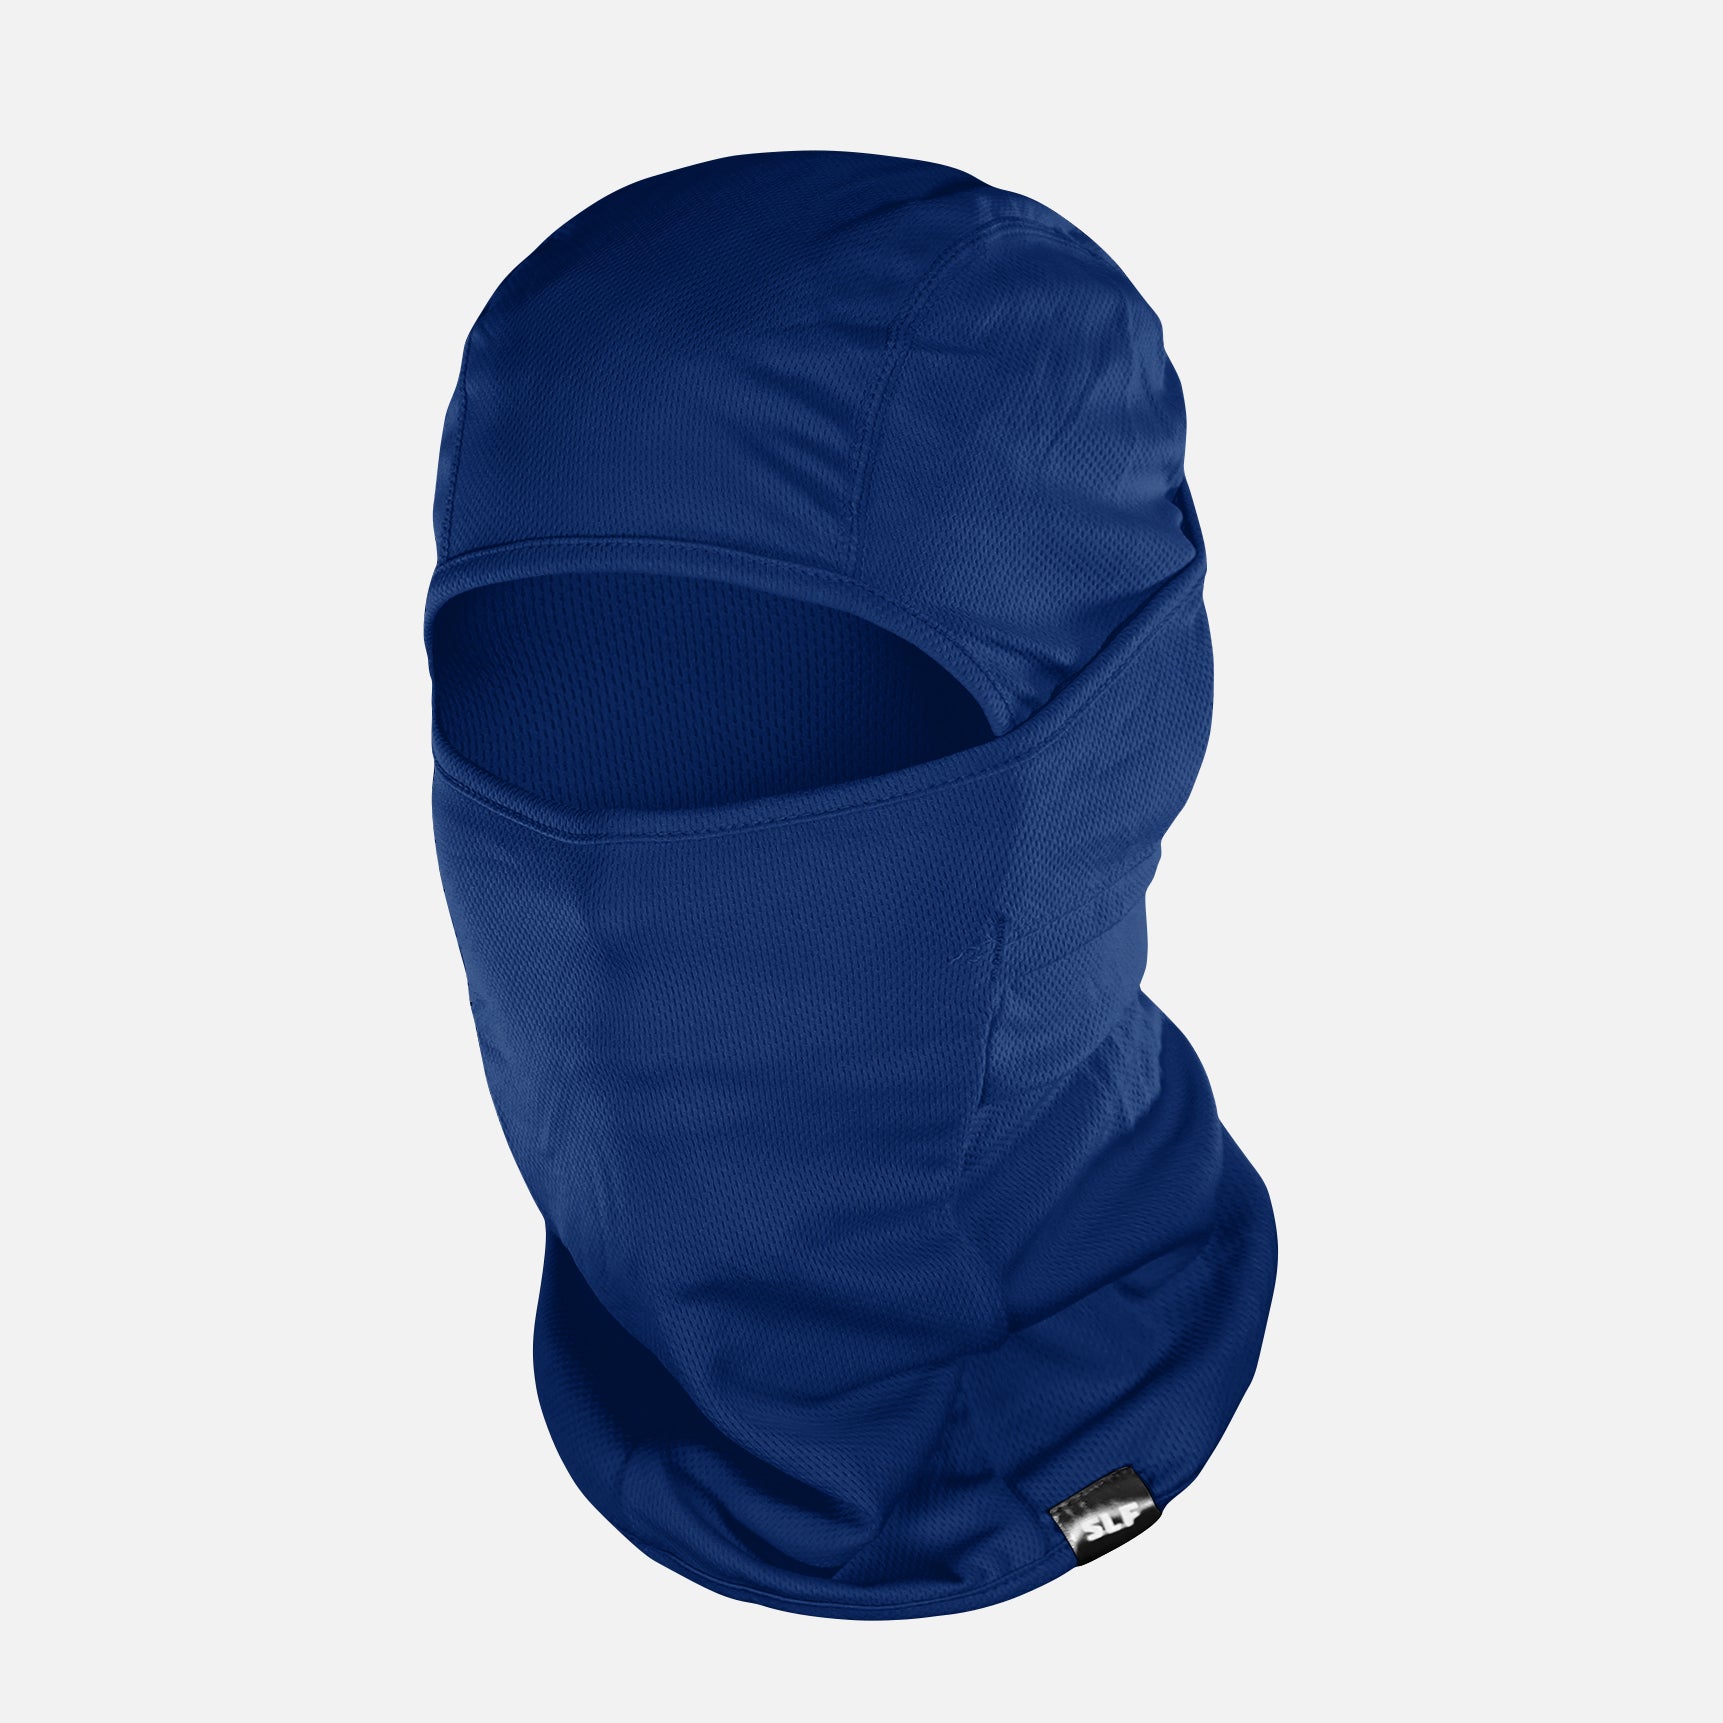 Hue Navy Loose-fitting Shiesty Mask – SLEEFS